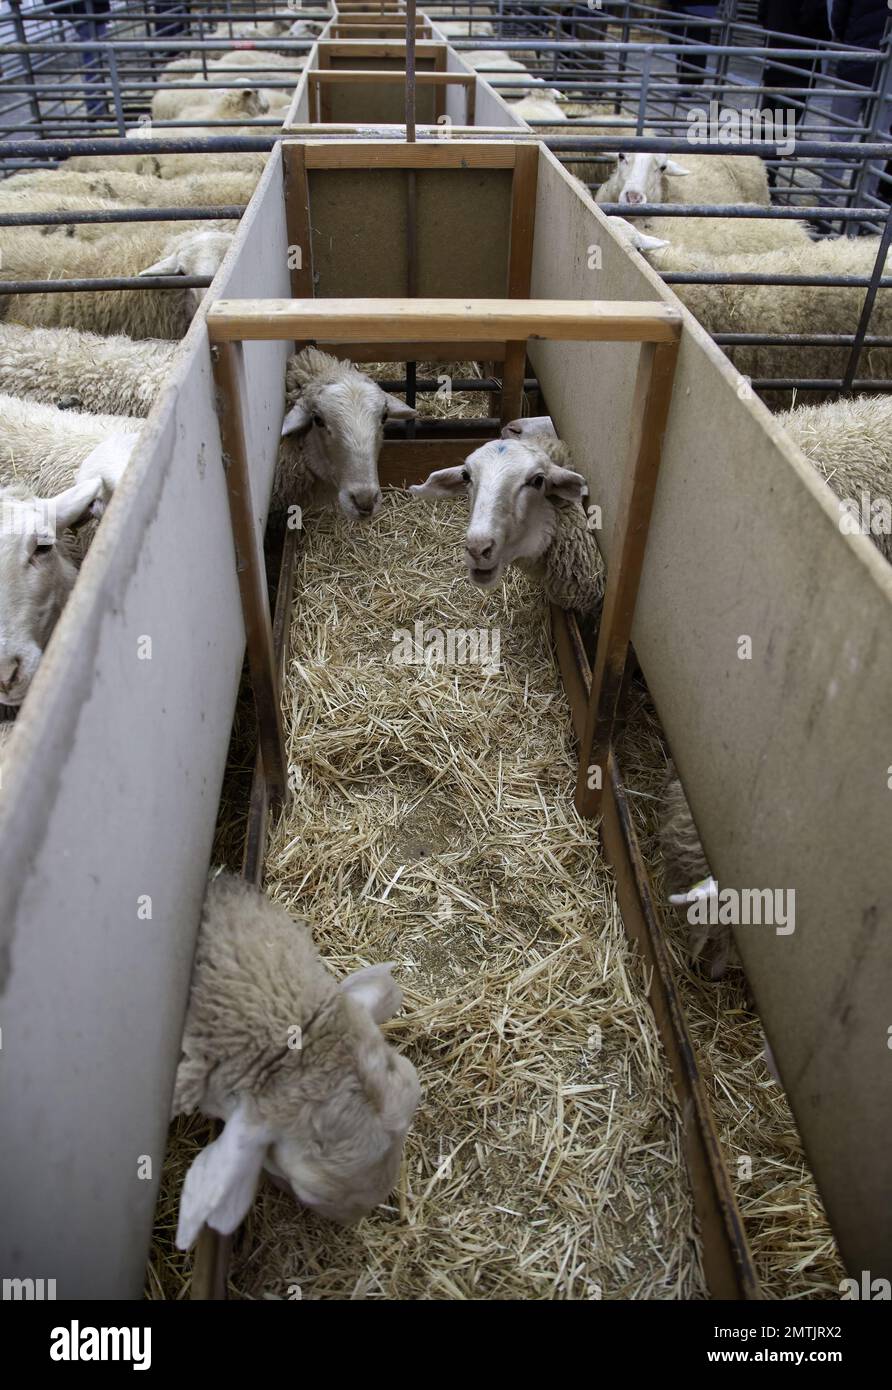 Detail of mammals in a farm, meat industry Stock Photo